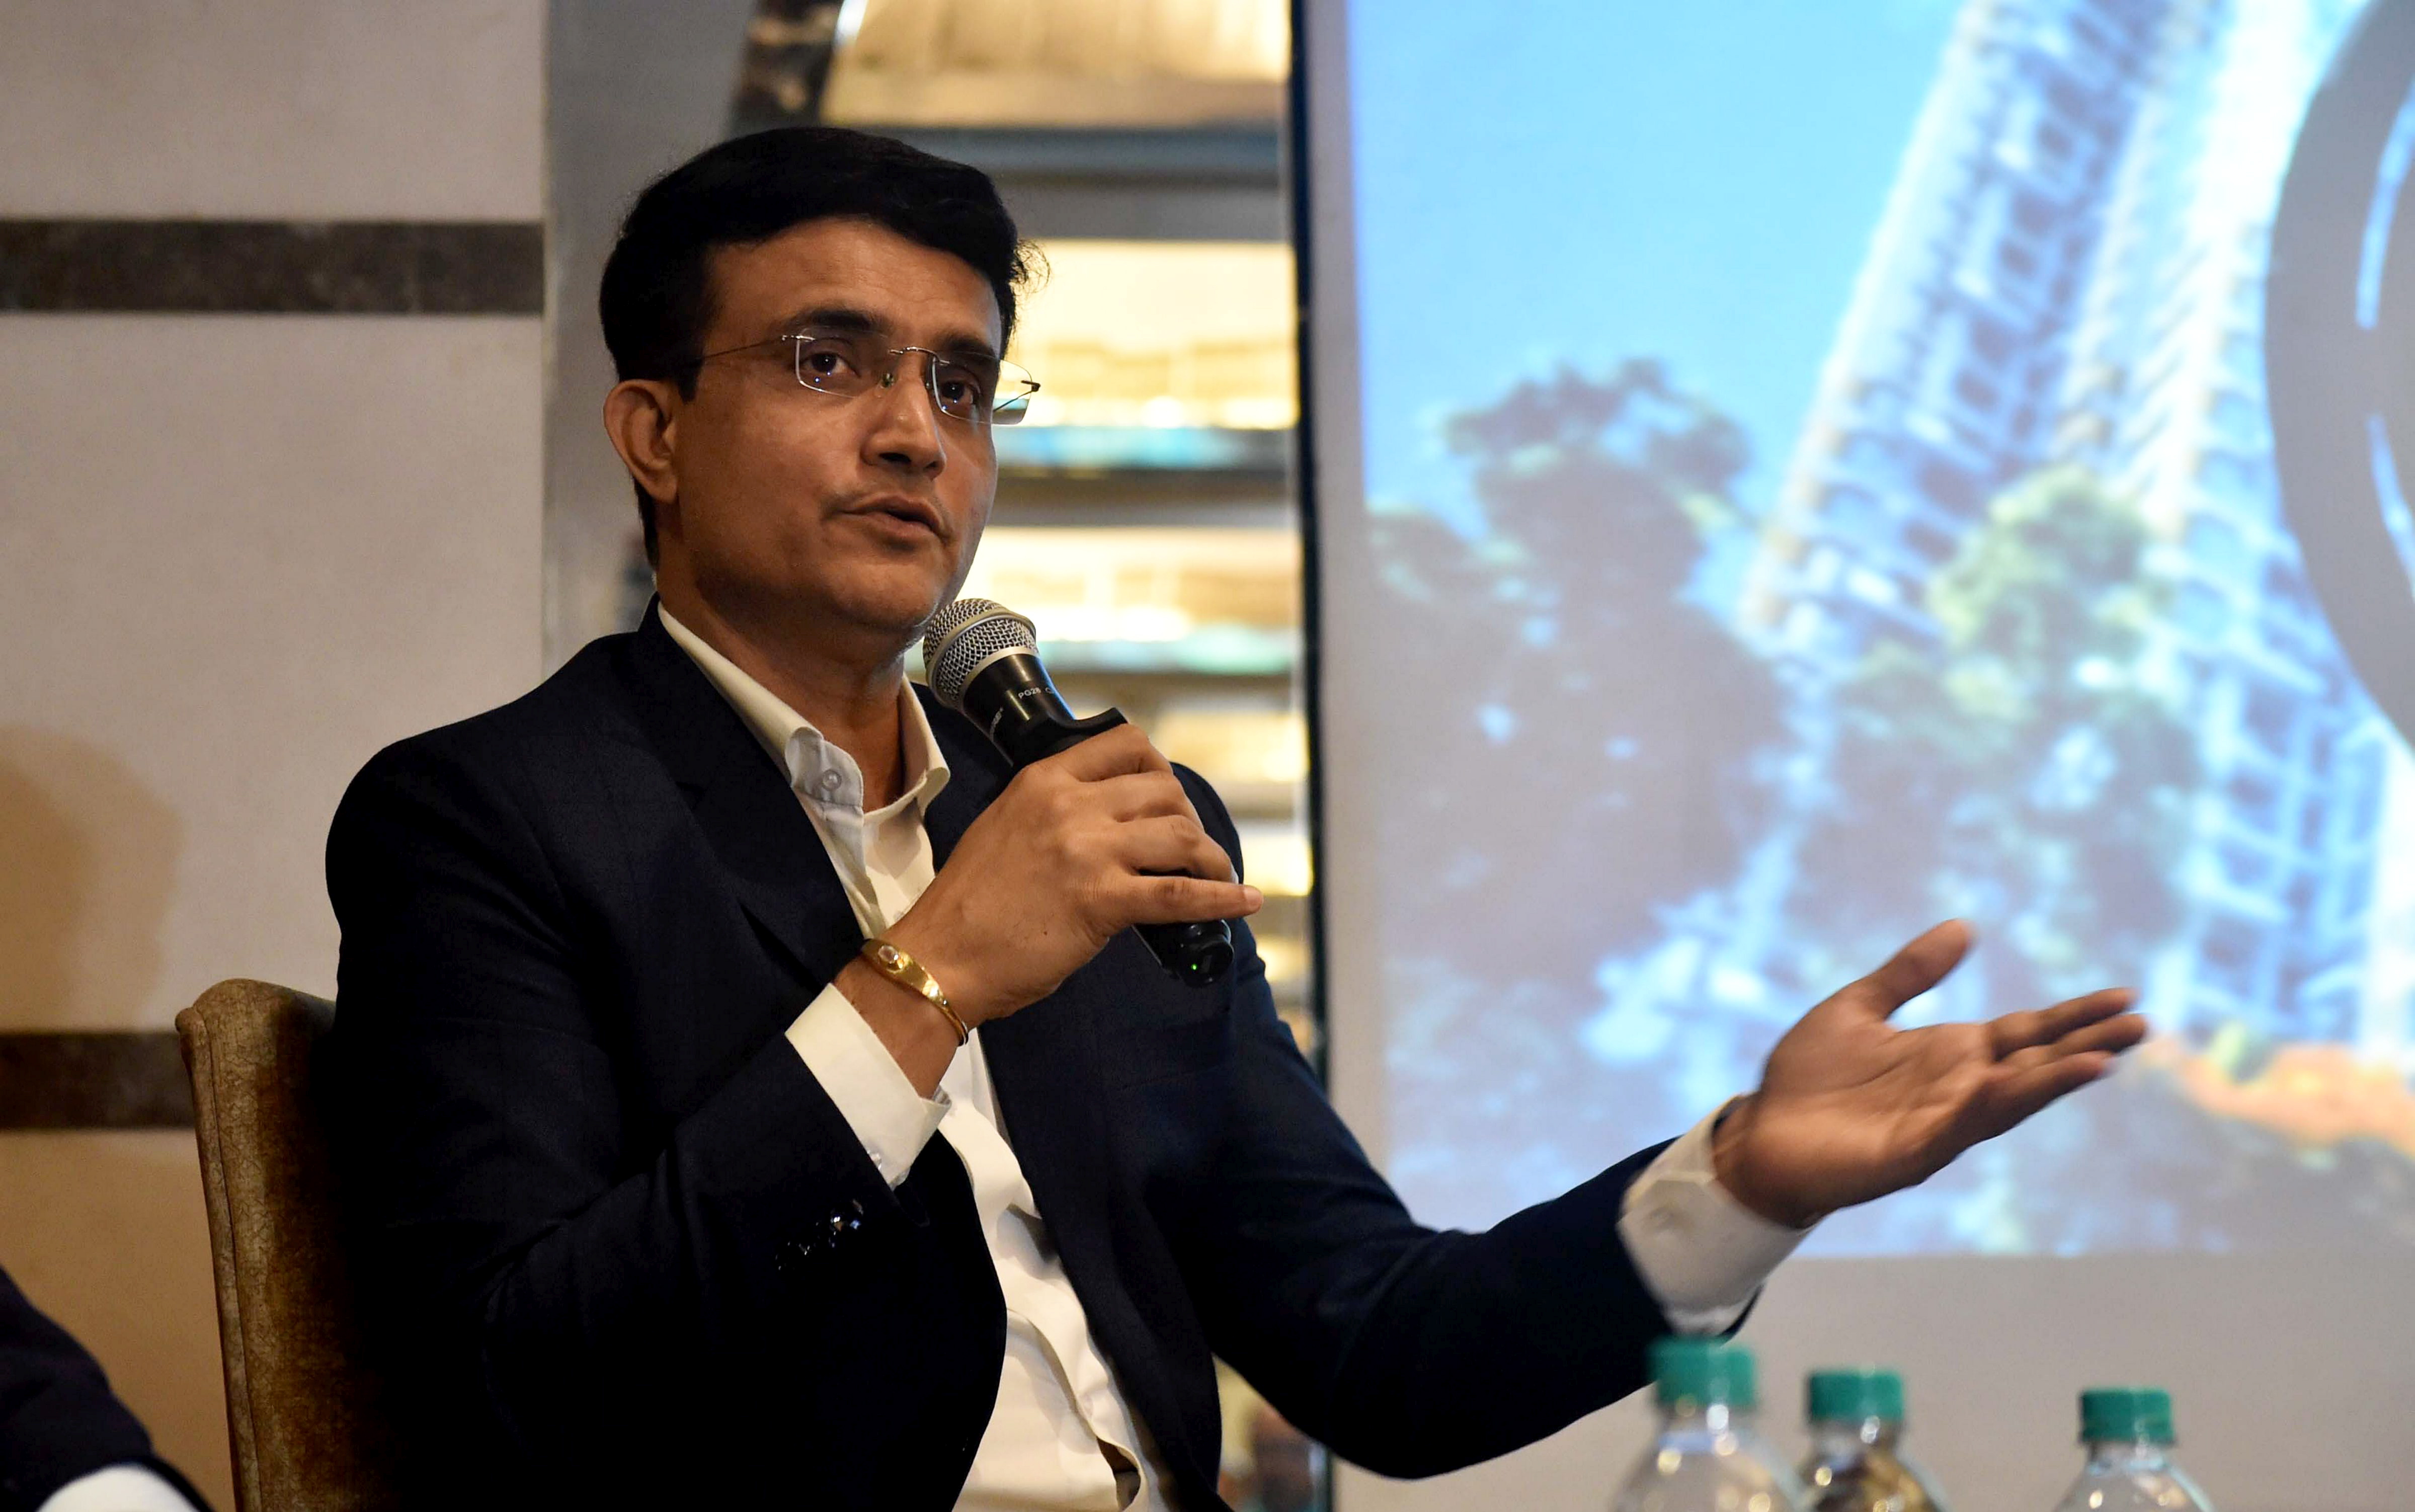 After Sourav Ganguly's 'new beginning' tweet raises speculation, BCCI chief says it is about 'app-launch'